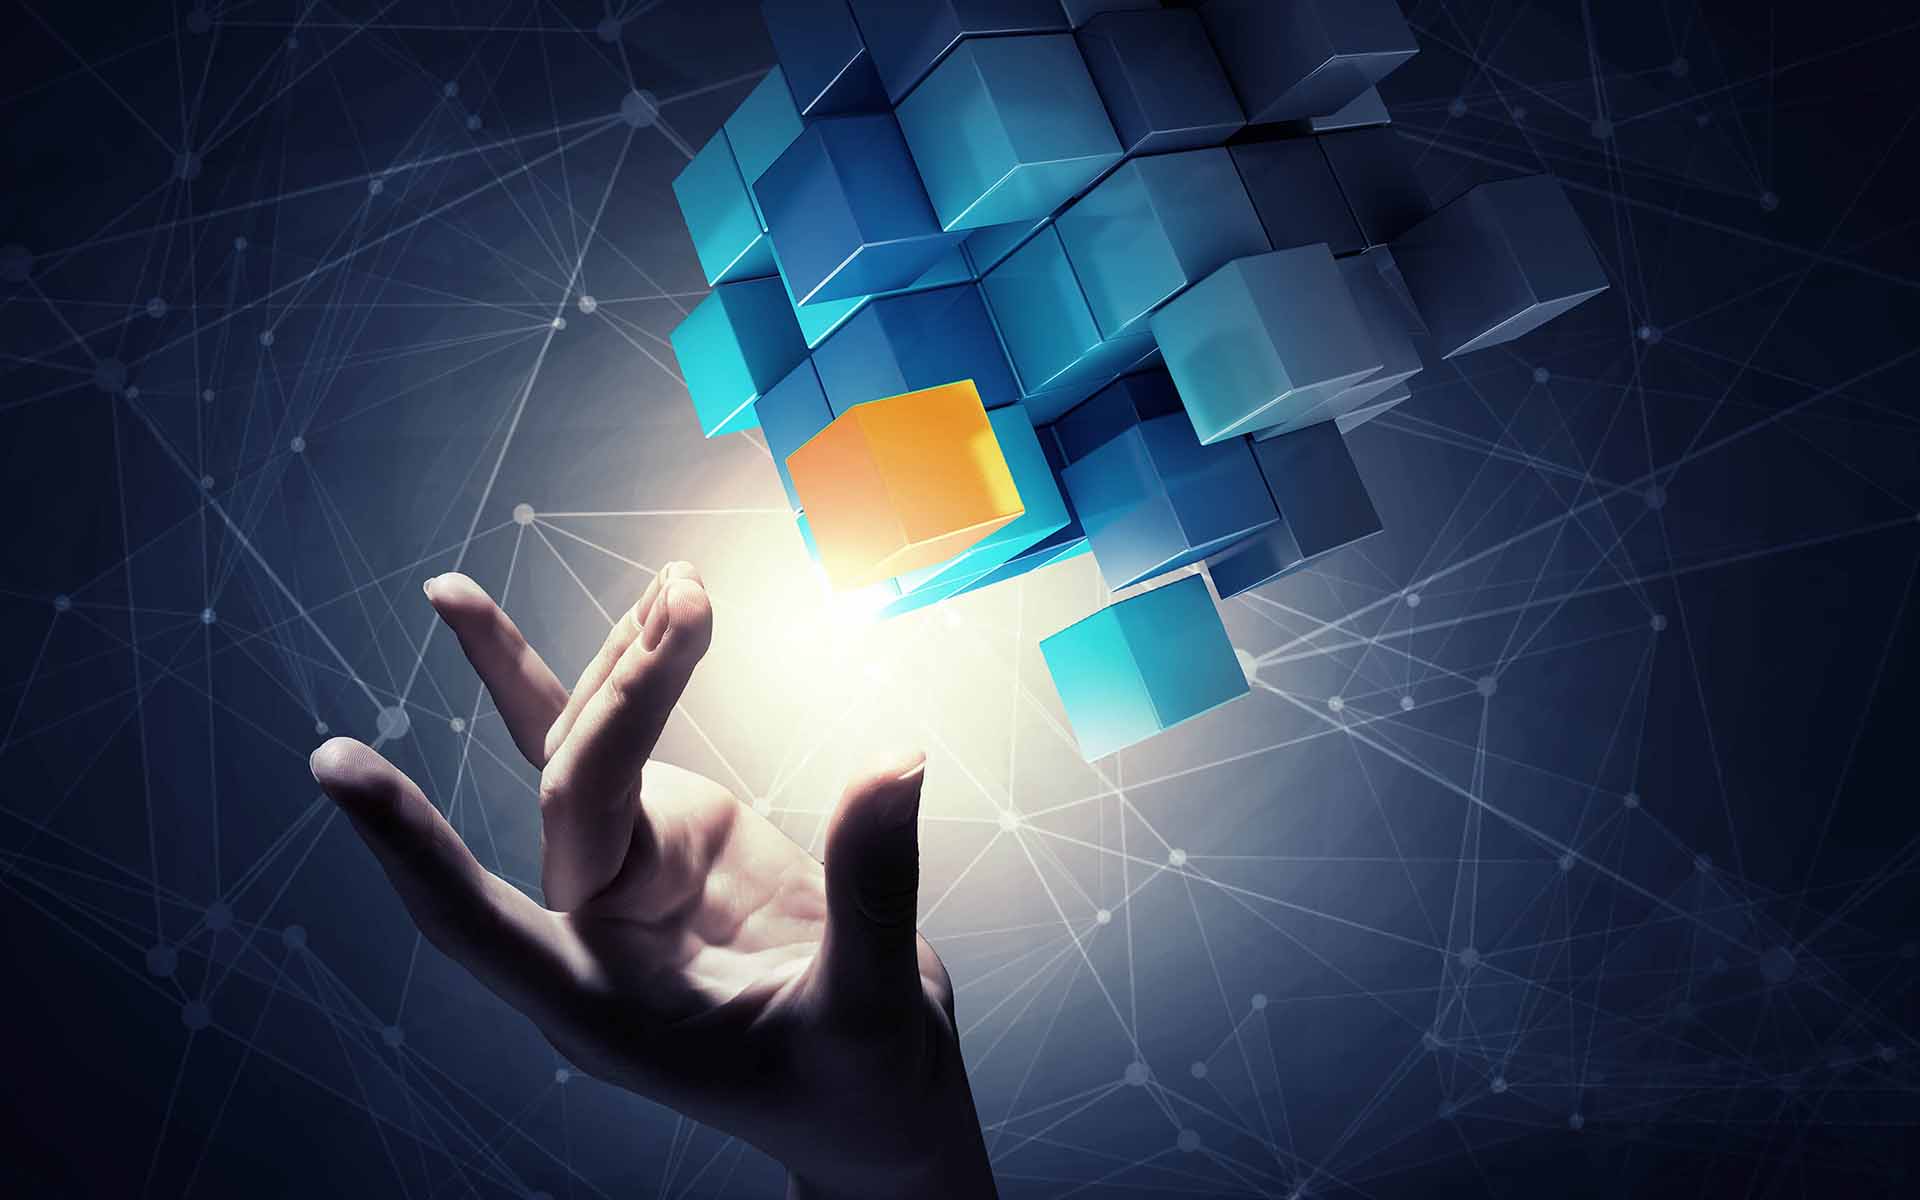 Blockchain Technology is Gaining Ground – But Not Where You’d Expect